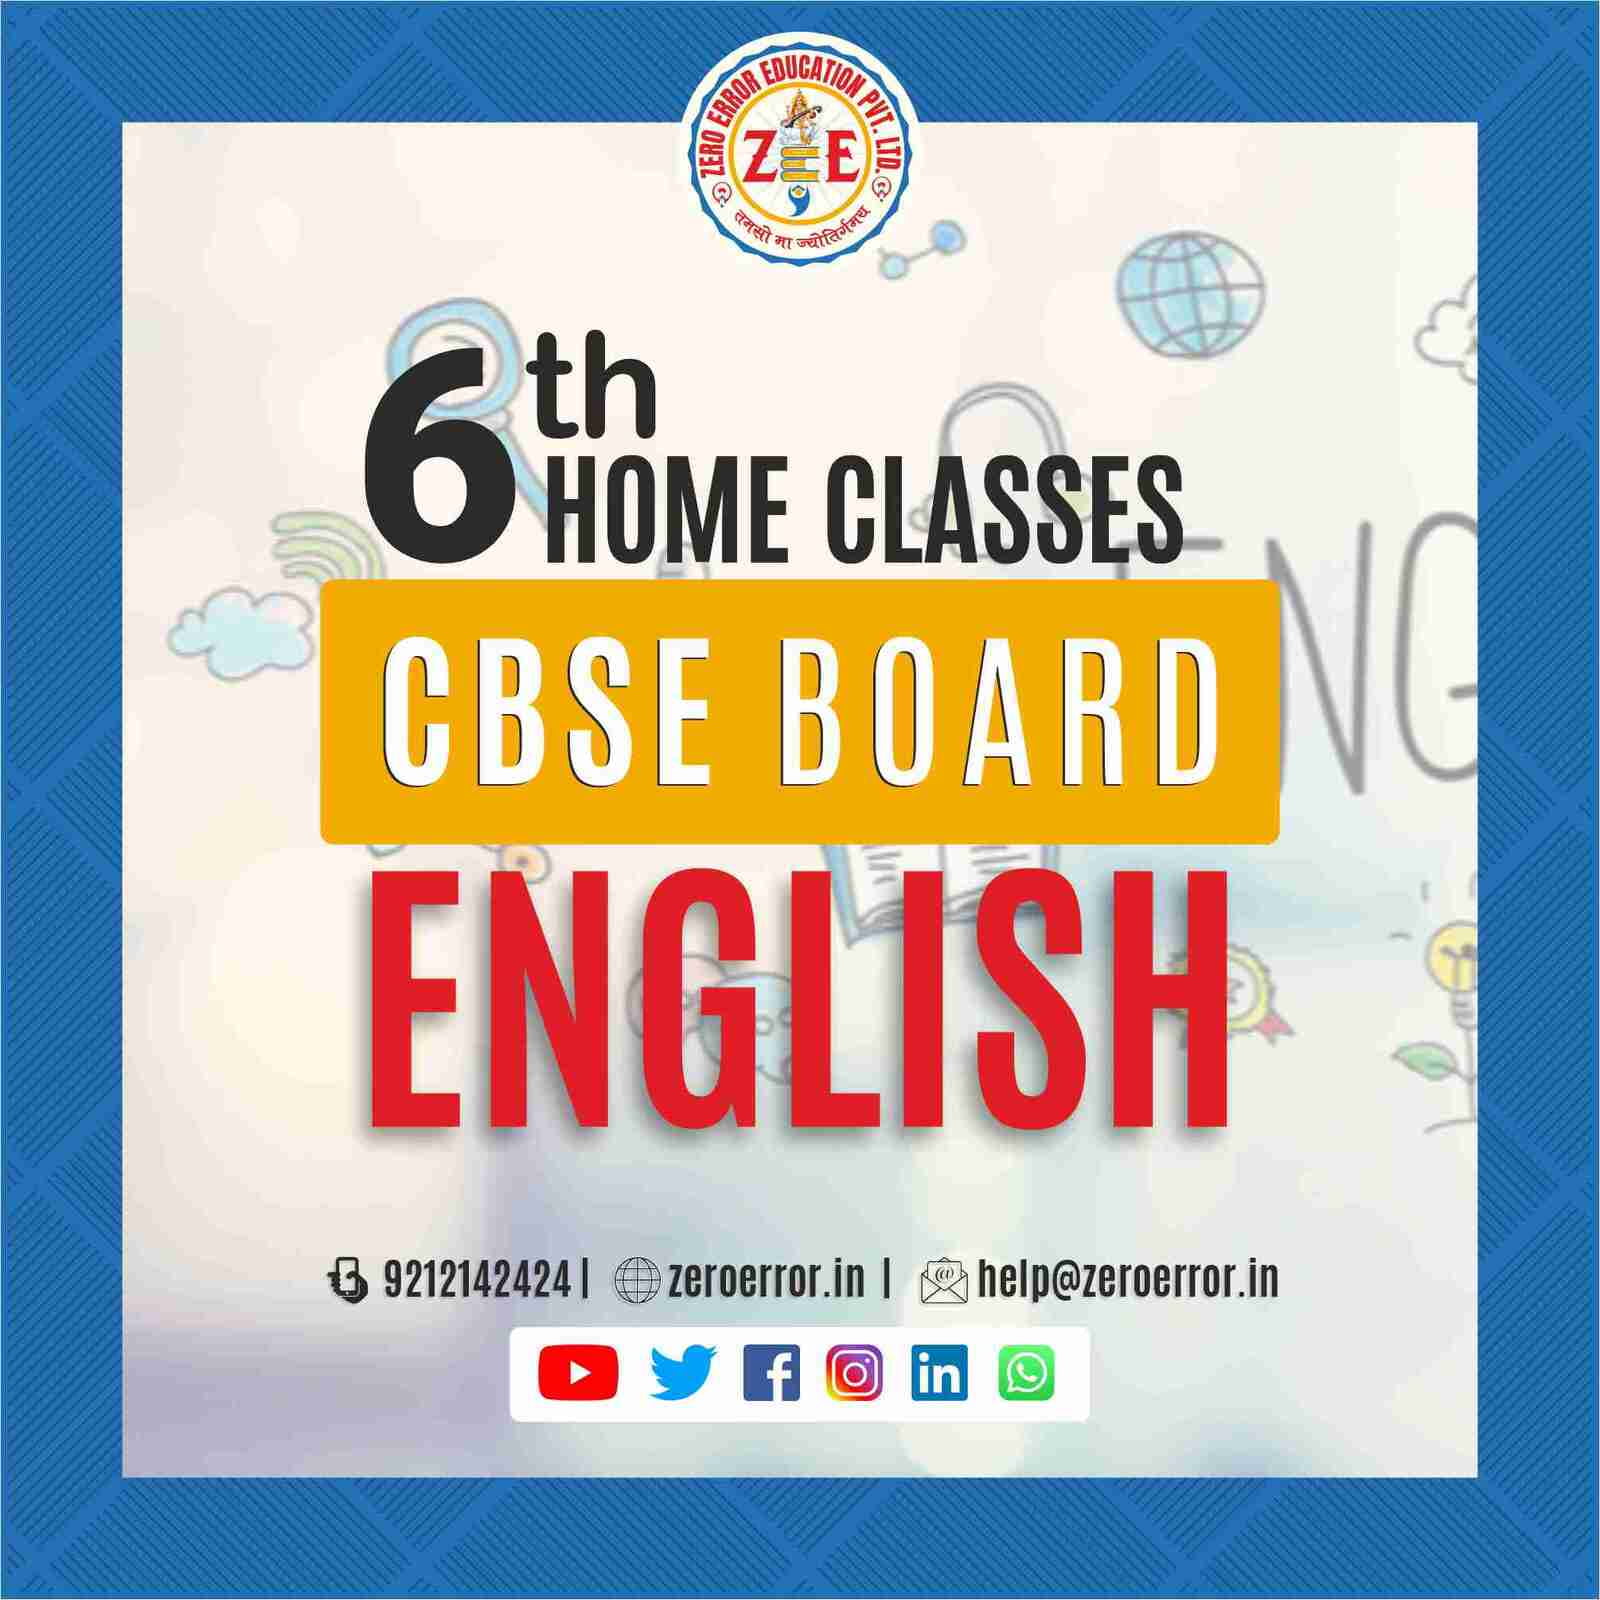 6th Grade CBSE English Online Classes by Zero Error Education Prepare for your CBSE board exams with online and offline English classes for 6th grade. Learn from experienced home tutors and get all the help you need to succeed. Enroll today at Zero Error Education. [https://zeroerror.in/] Call 9212142424 for more information.